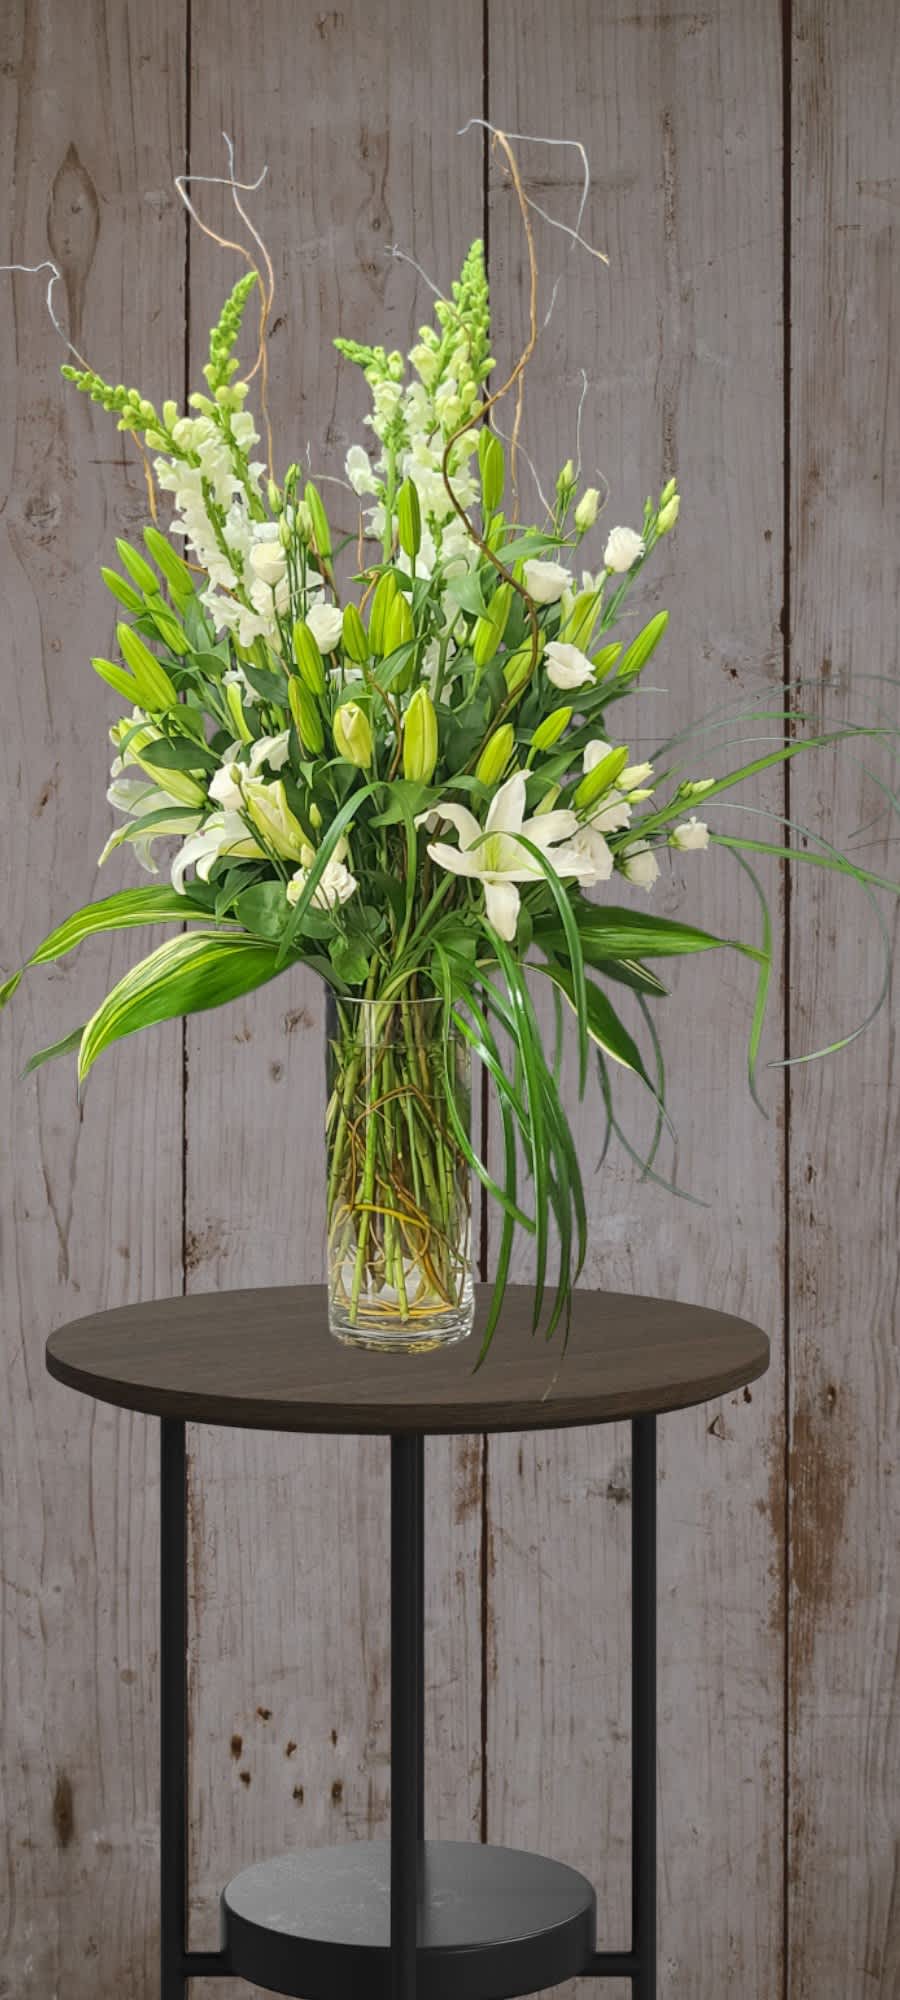 Stunning and Classic. This all white floral arrangement is luxurious and elegant.